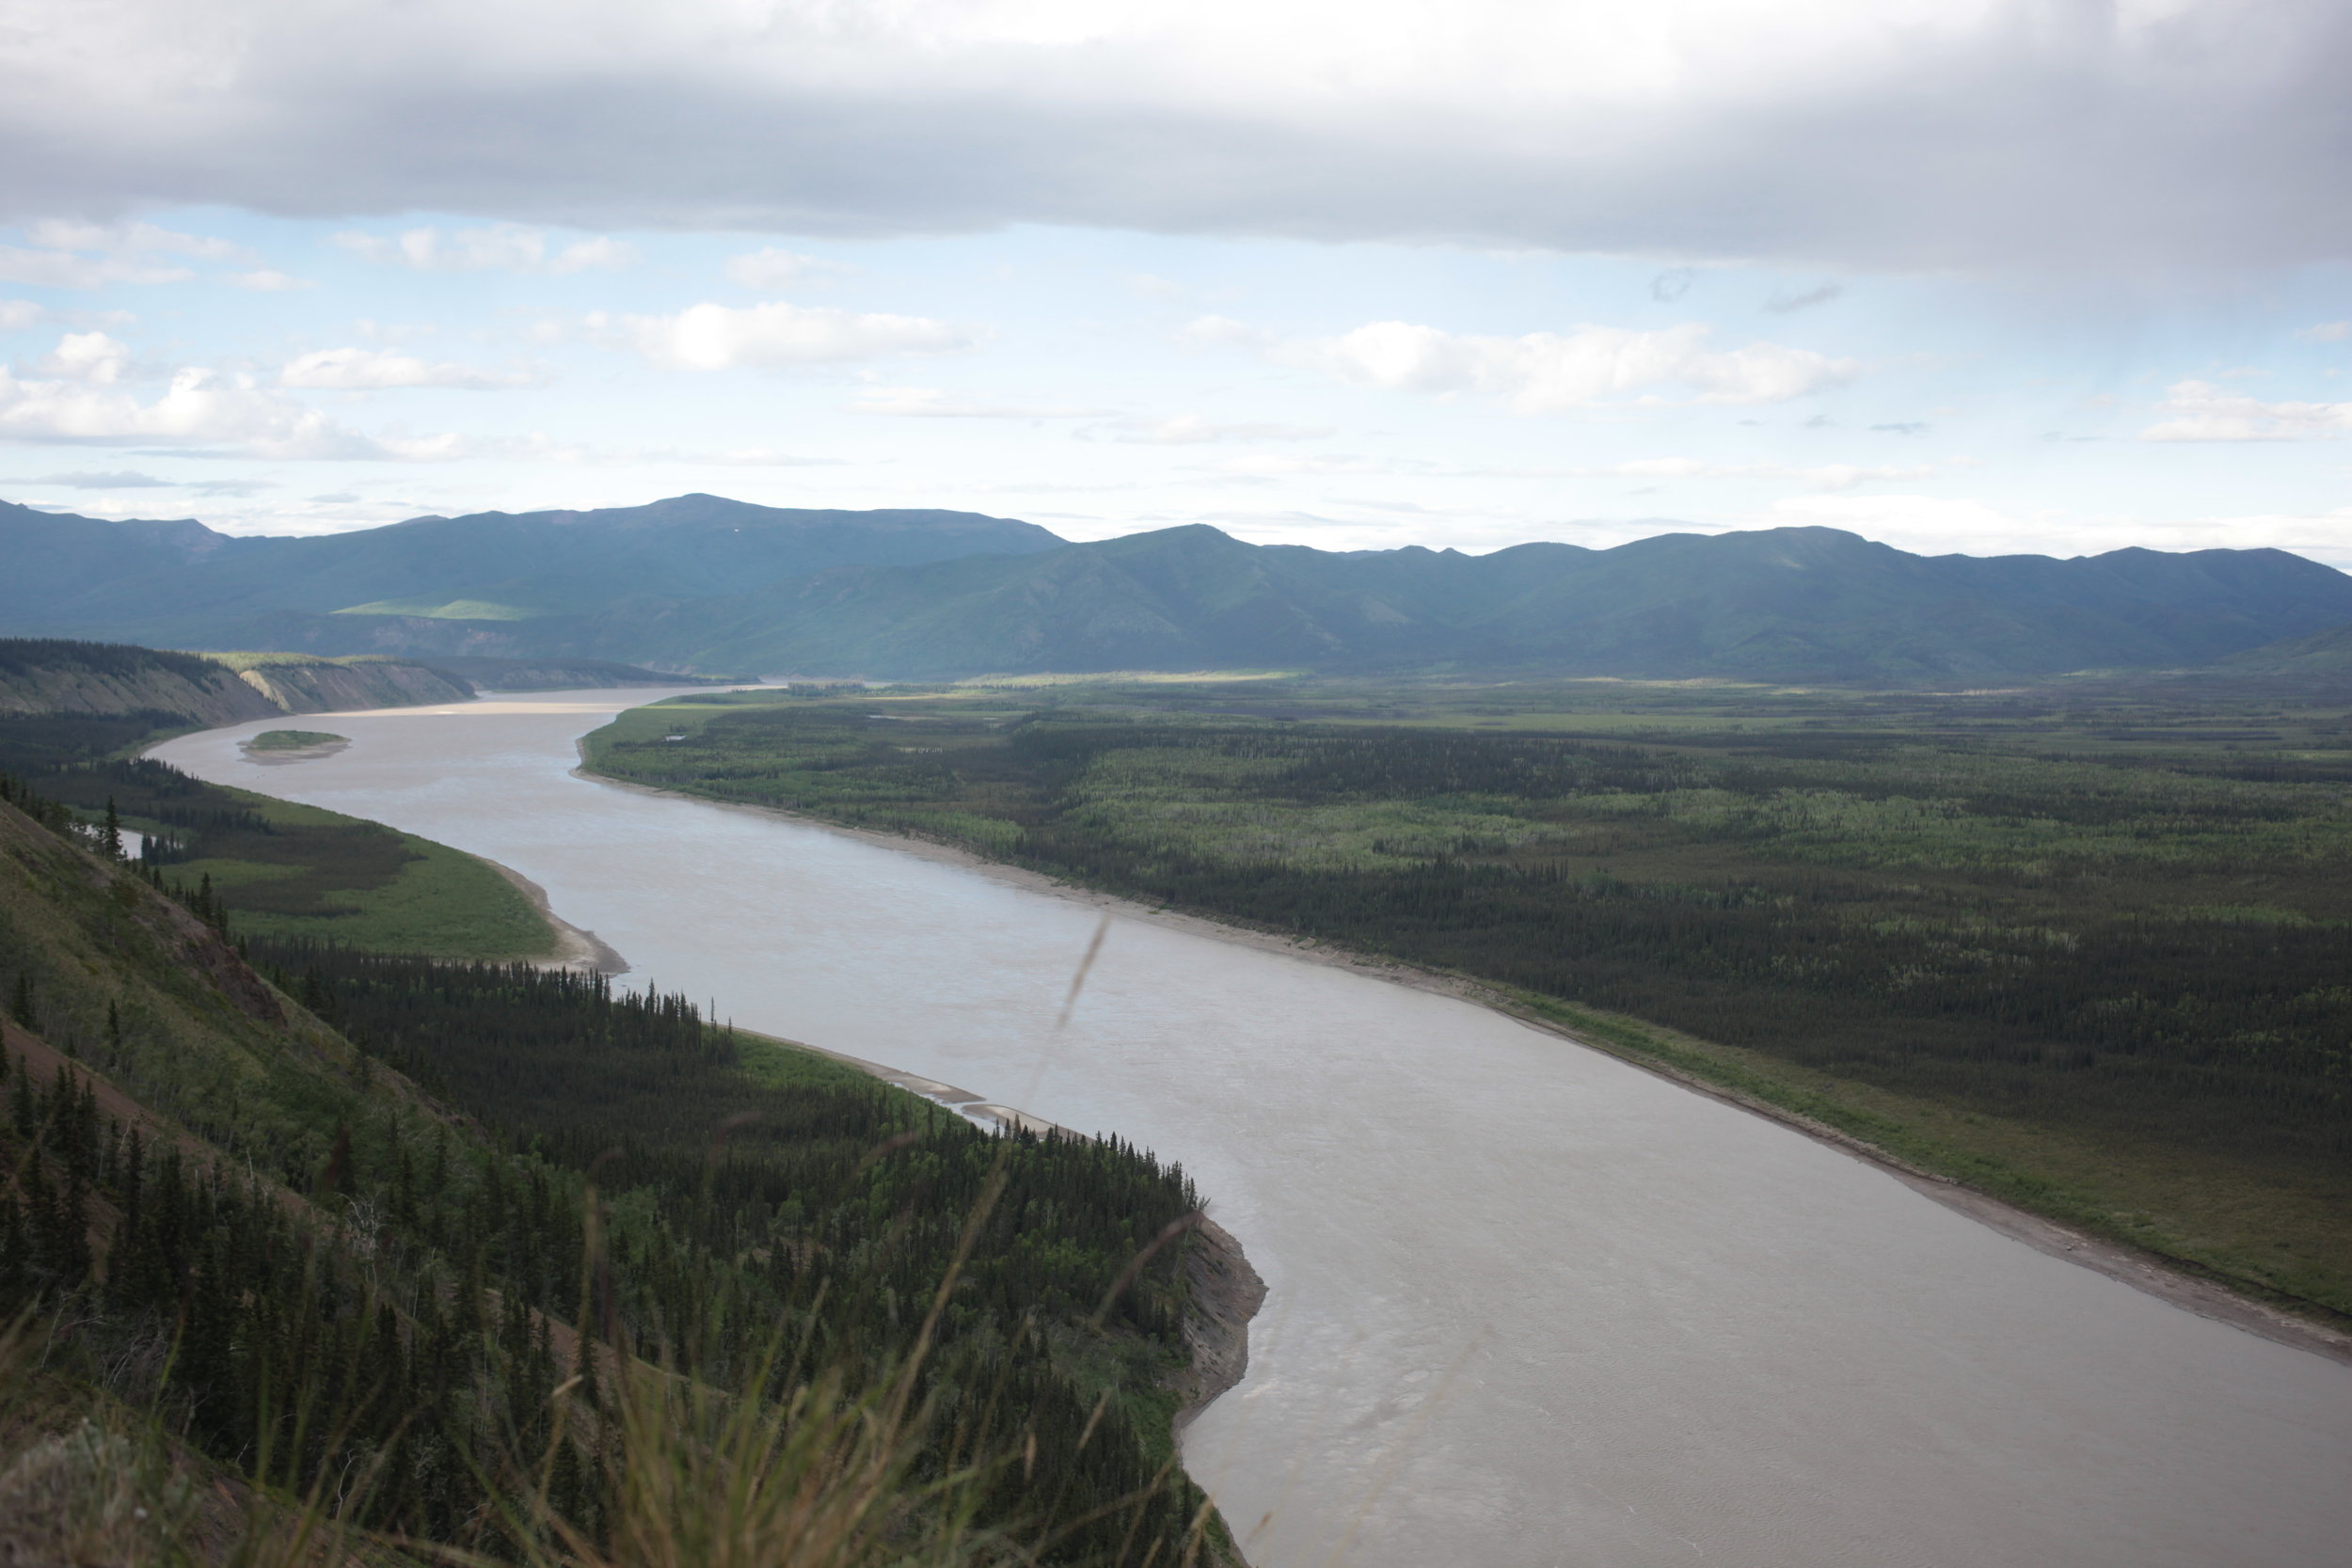 Approximate location of where Eagle's new fish wheel will be used on the Yukon River.